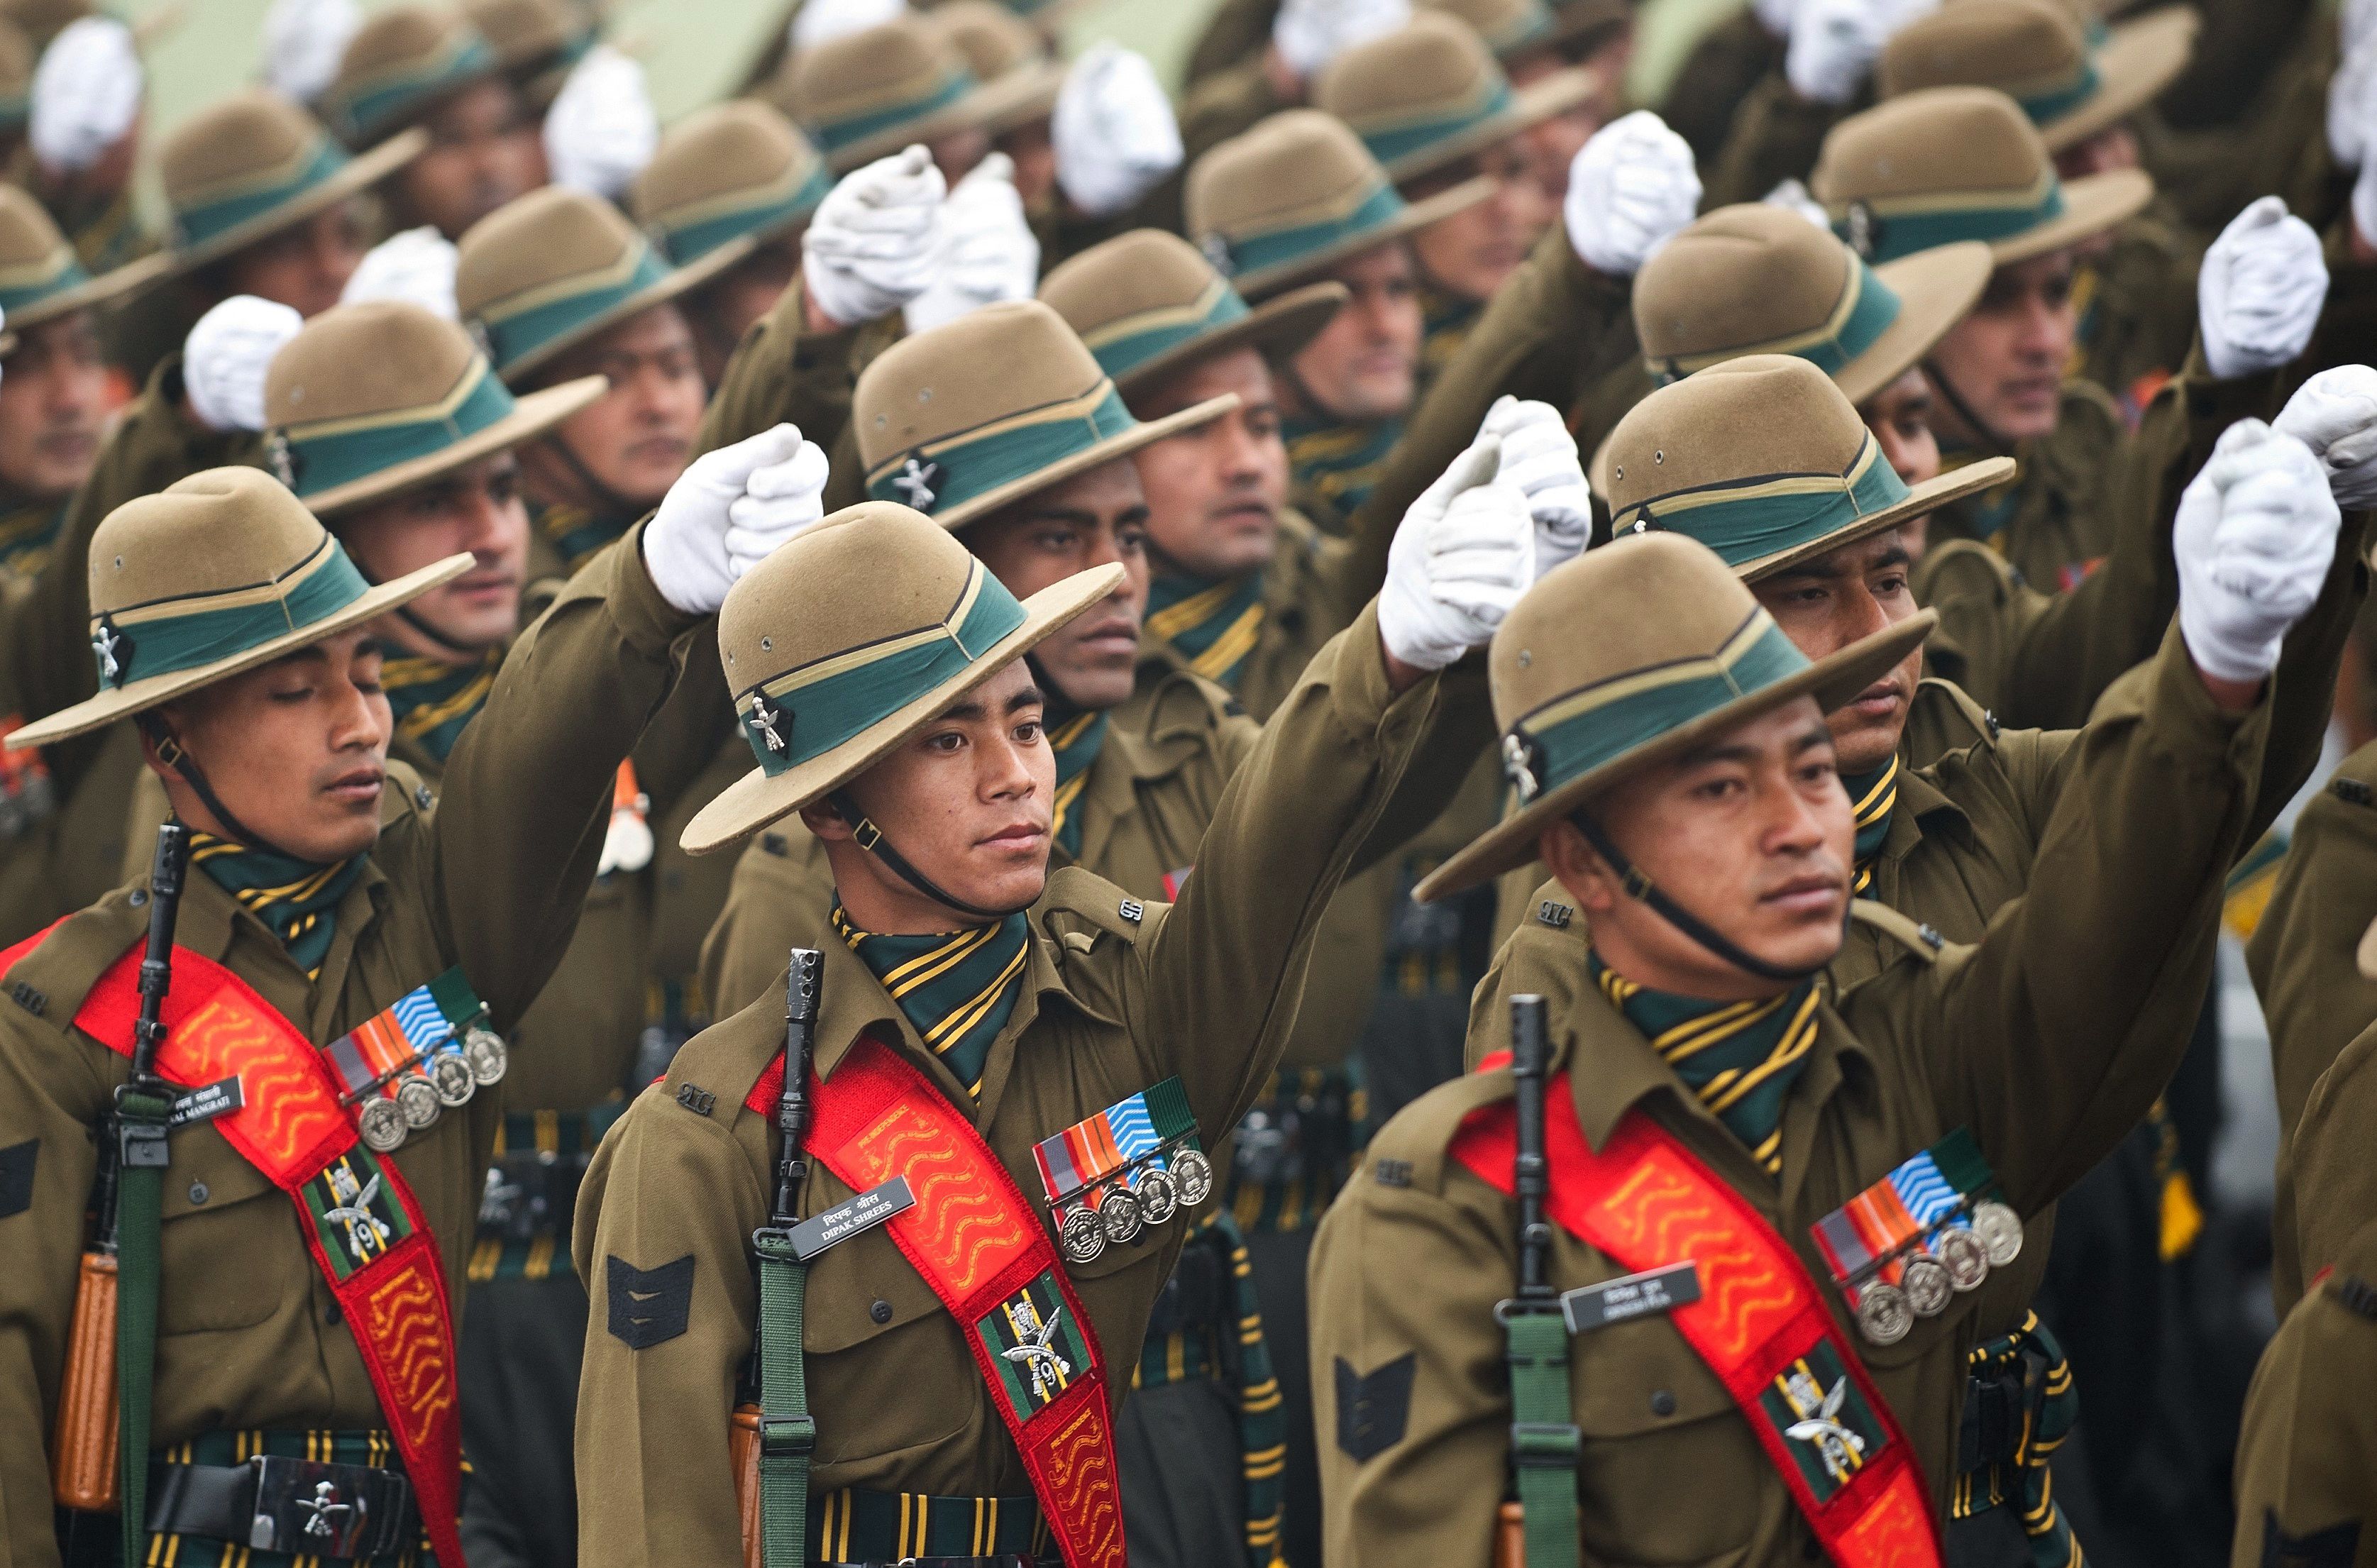 8 Indian Army Uniforms That Have to Be Earned by Candidates!